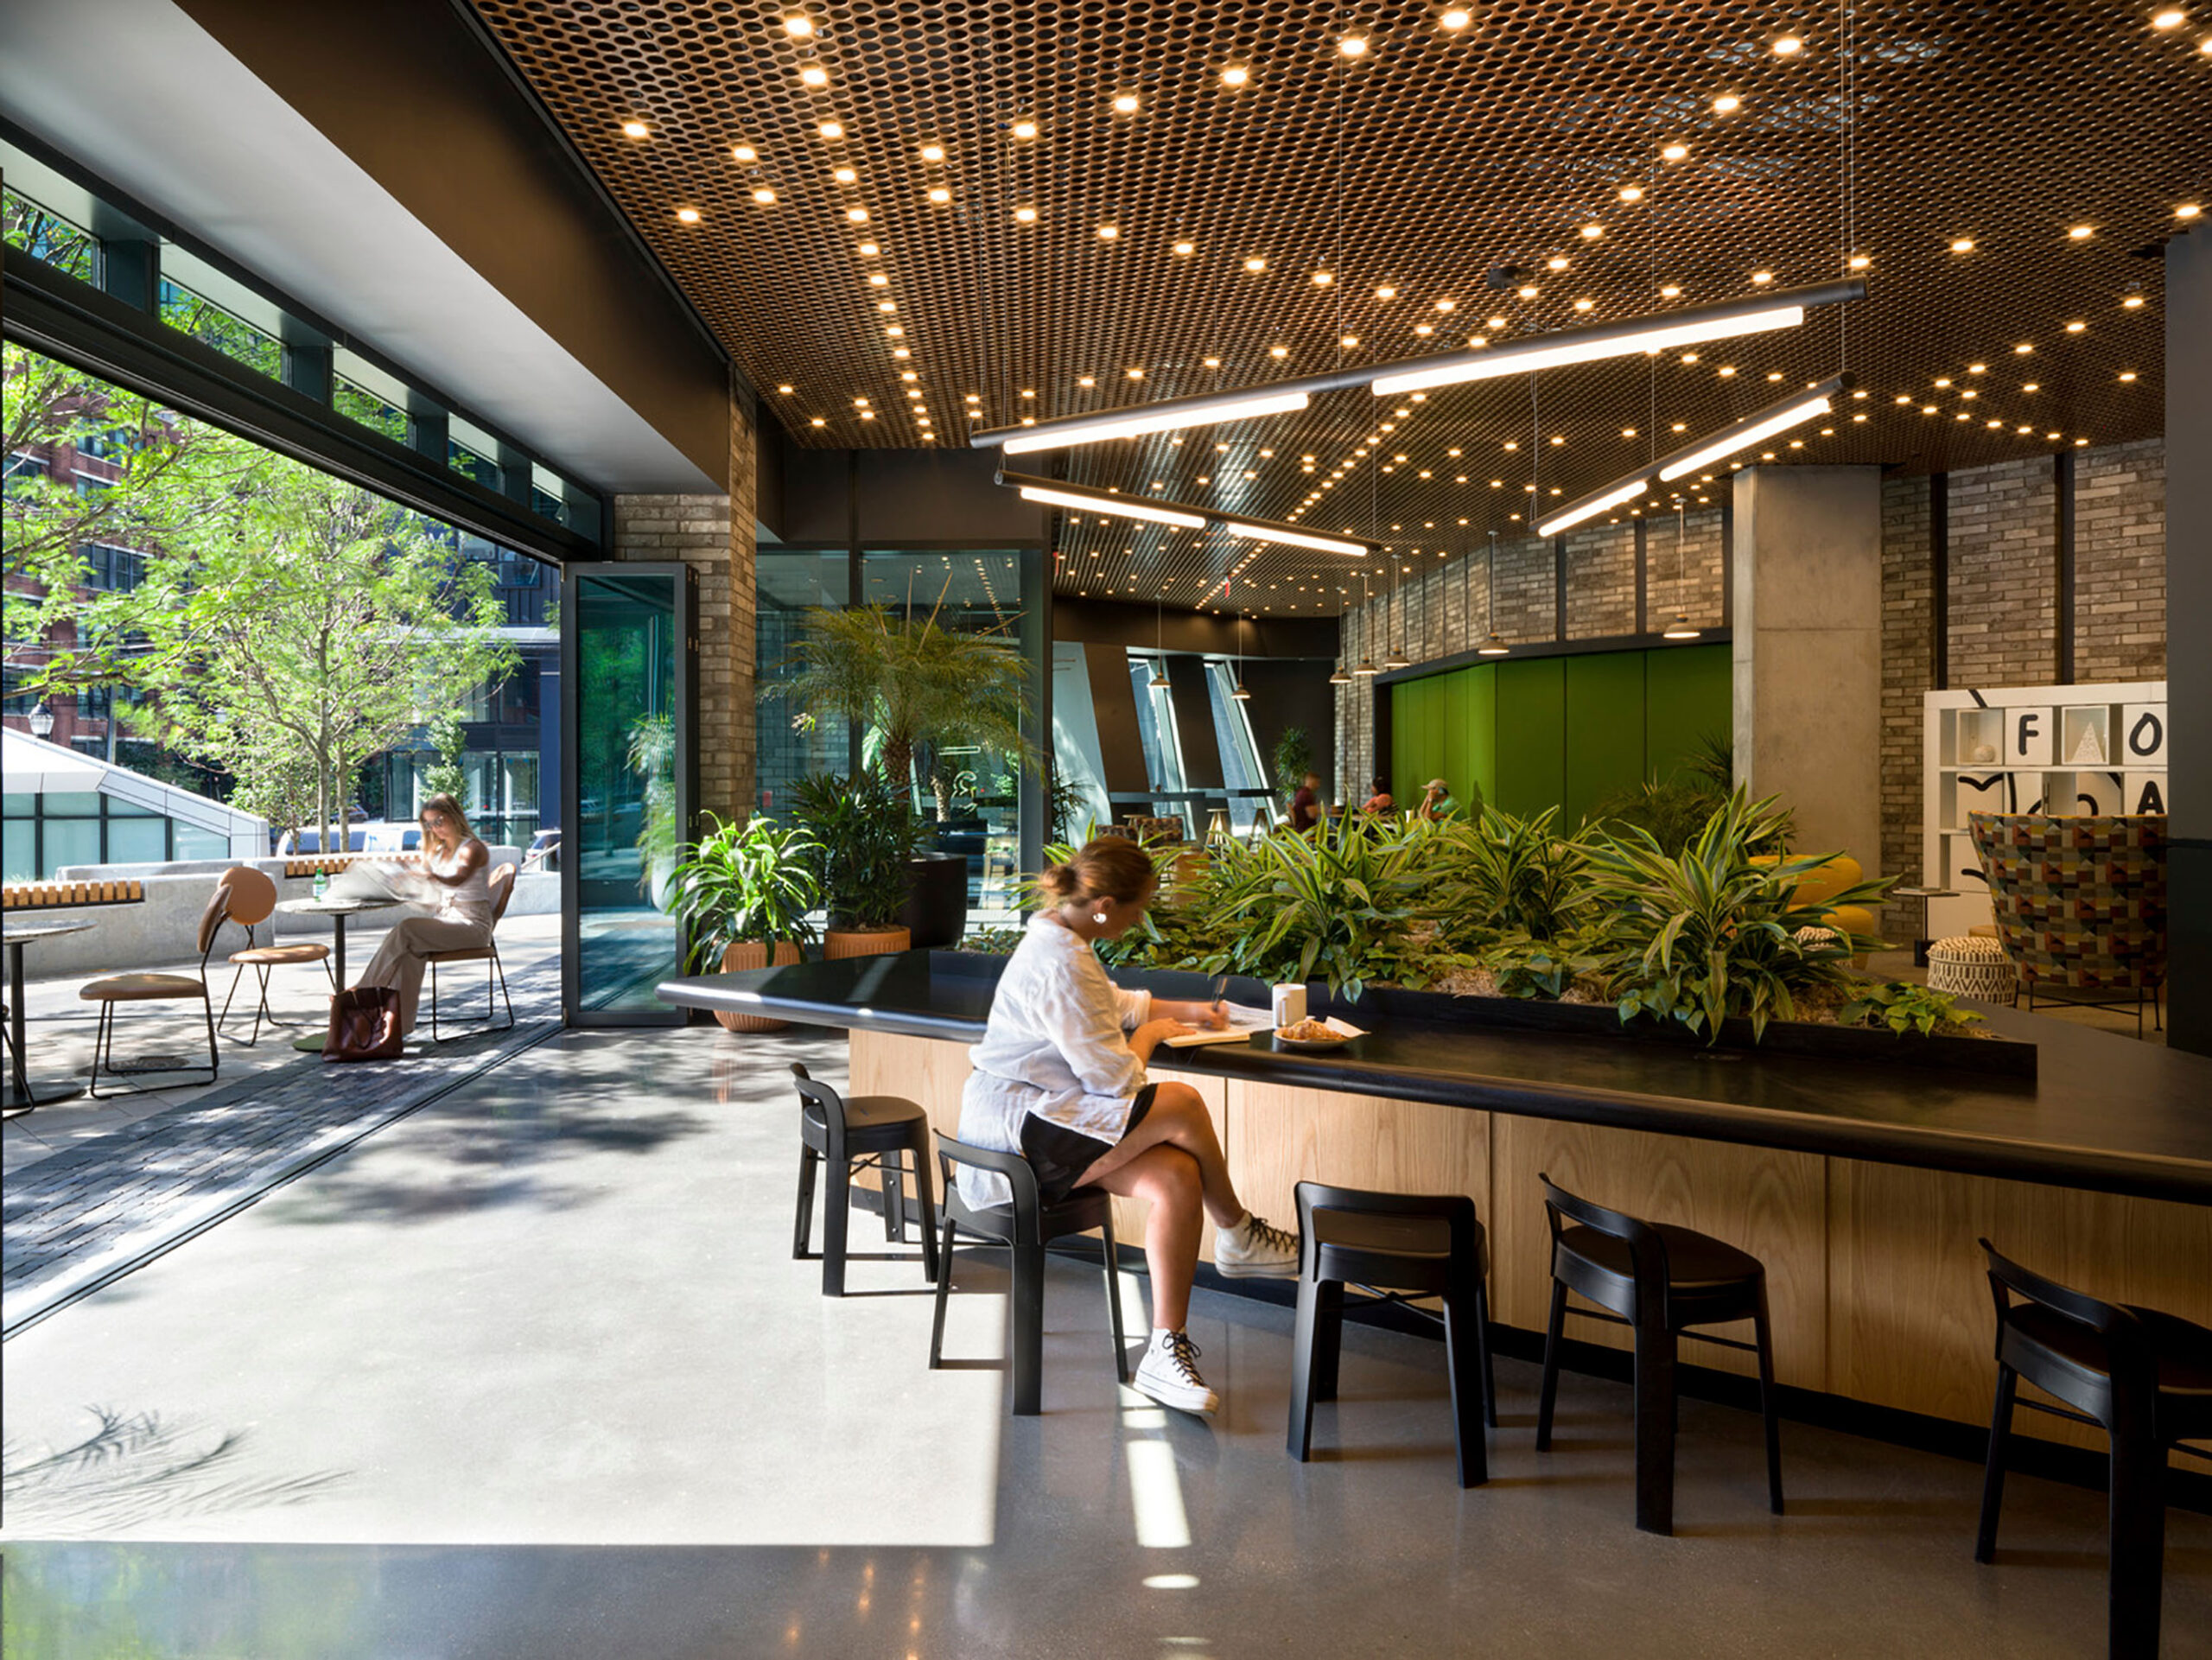 A modern and inviting indoor space illuminated by natural light and intricate ceiling lighting. The room has open access to the outside and is filled with plants and biophilic elements.